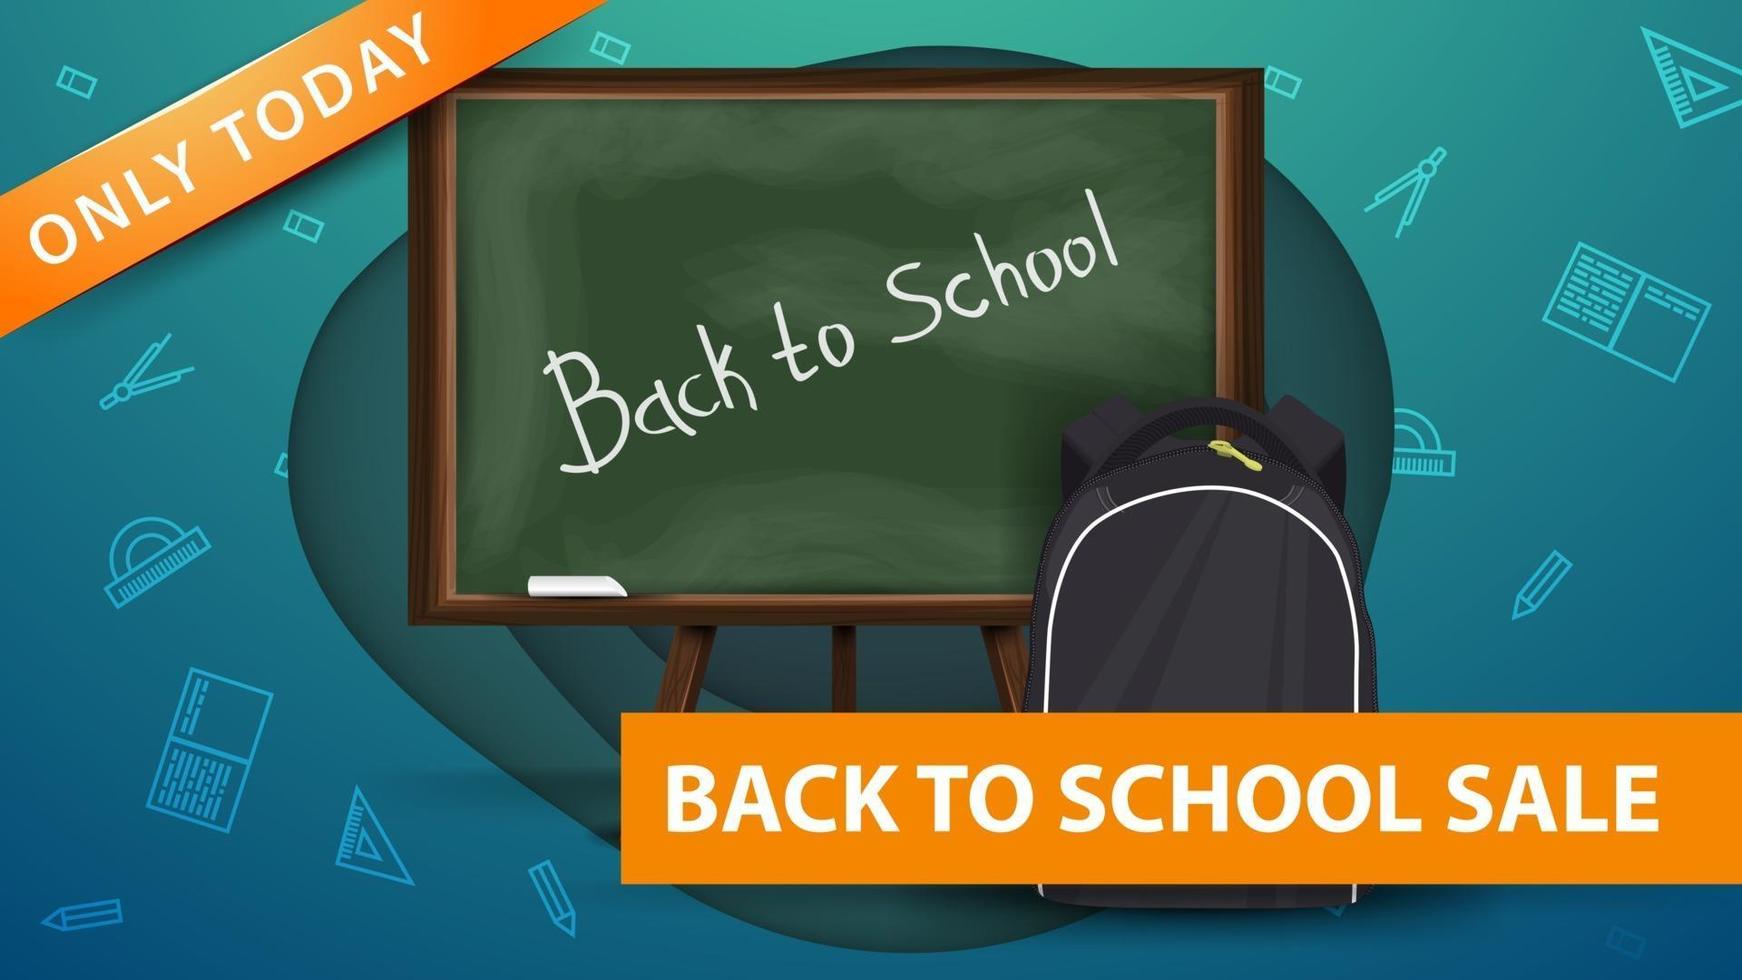 Back to school sale, modern green discount banner in paper cut vector